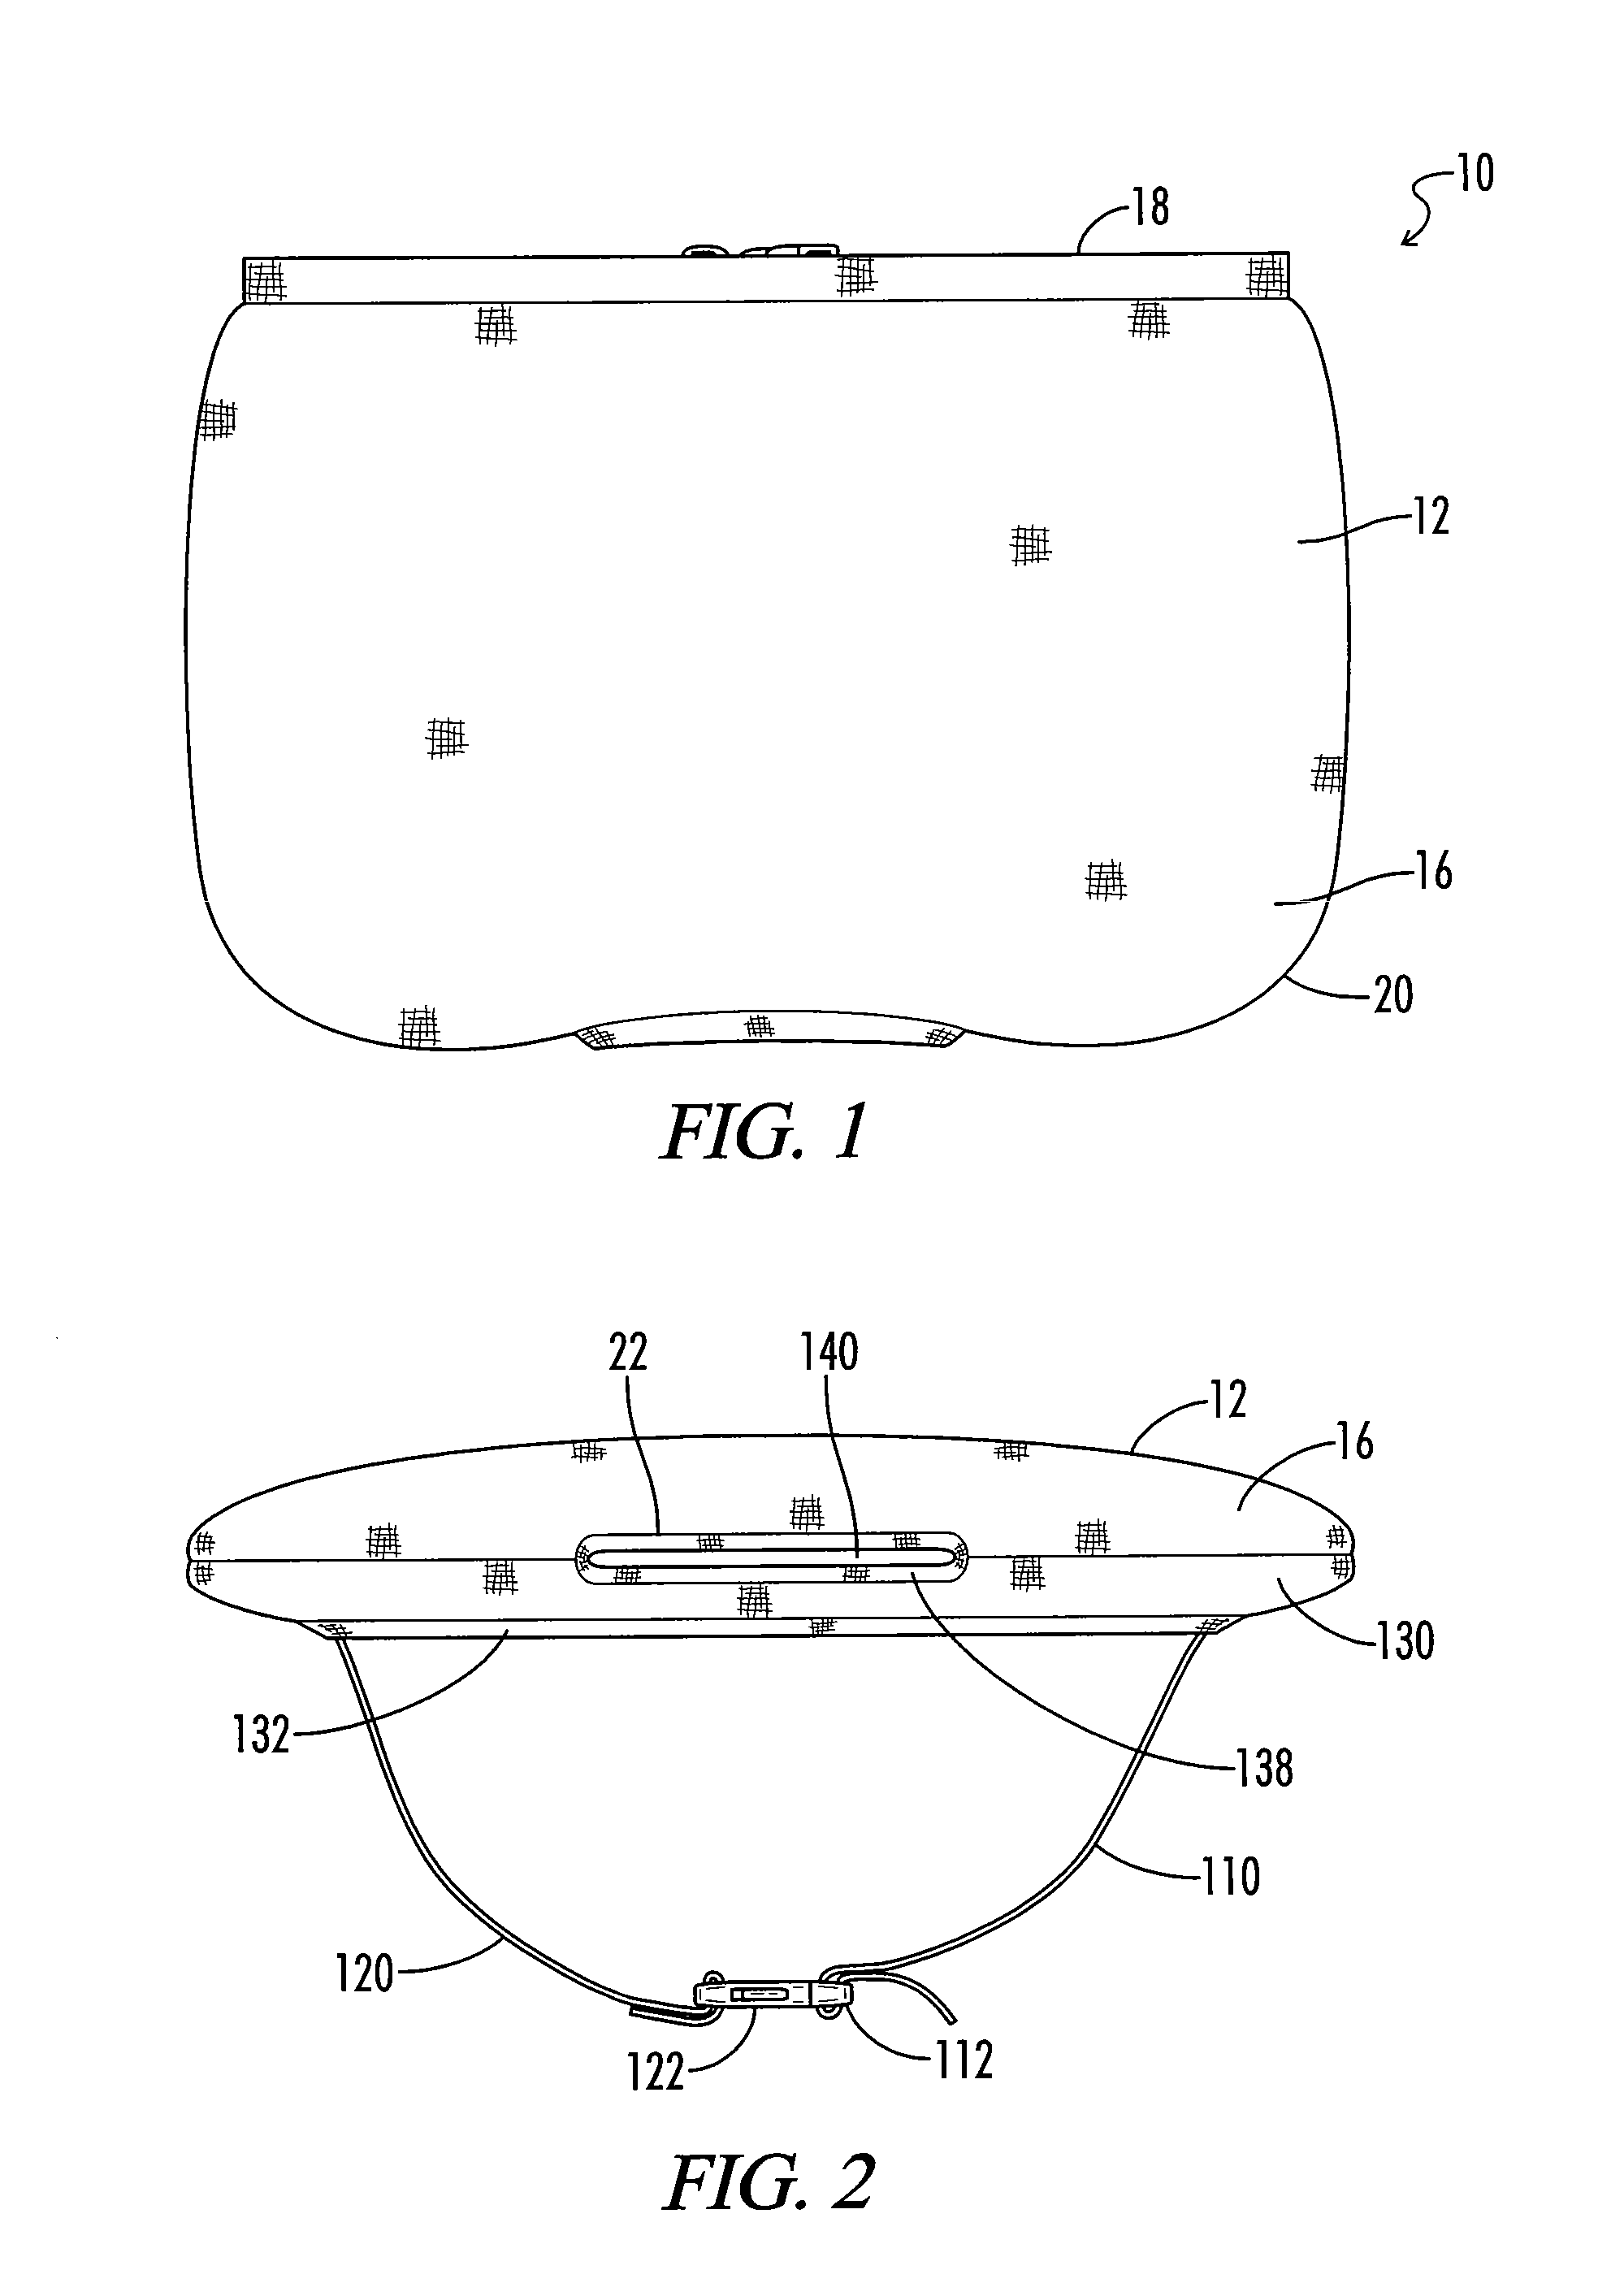 Infant covering blanket adapted for use with infant supporting apparatuses